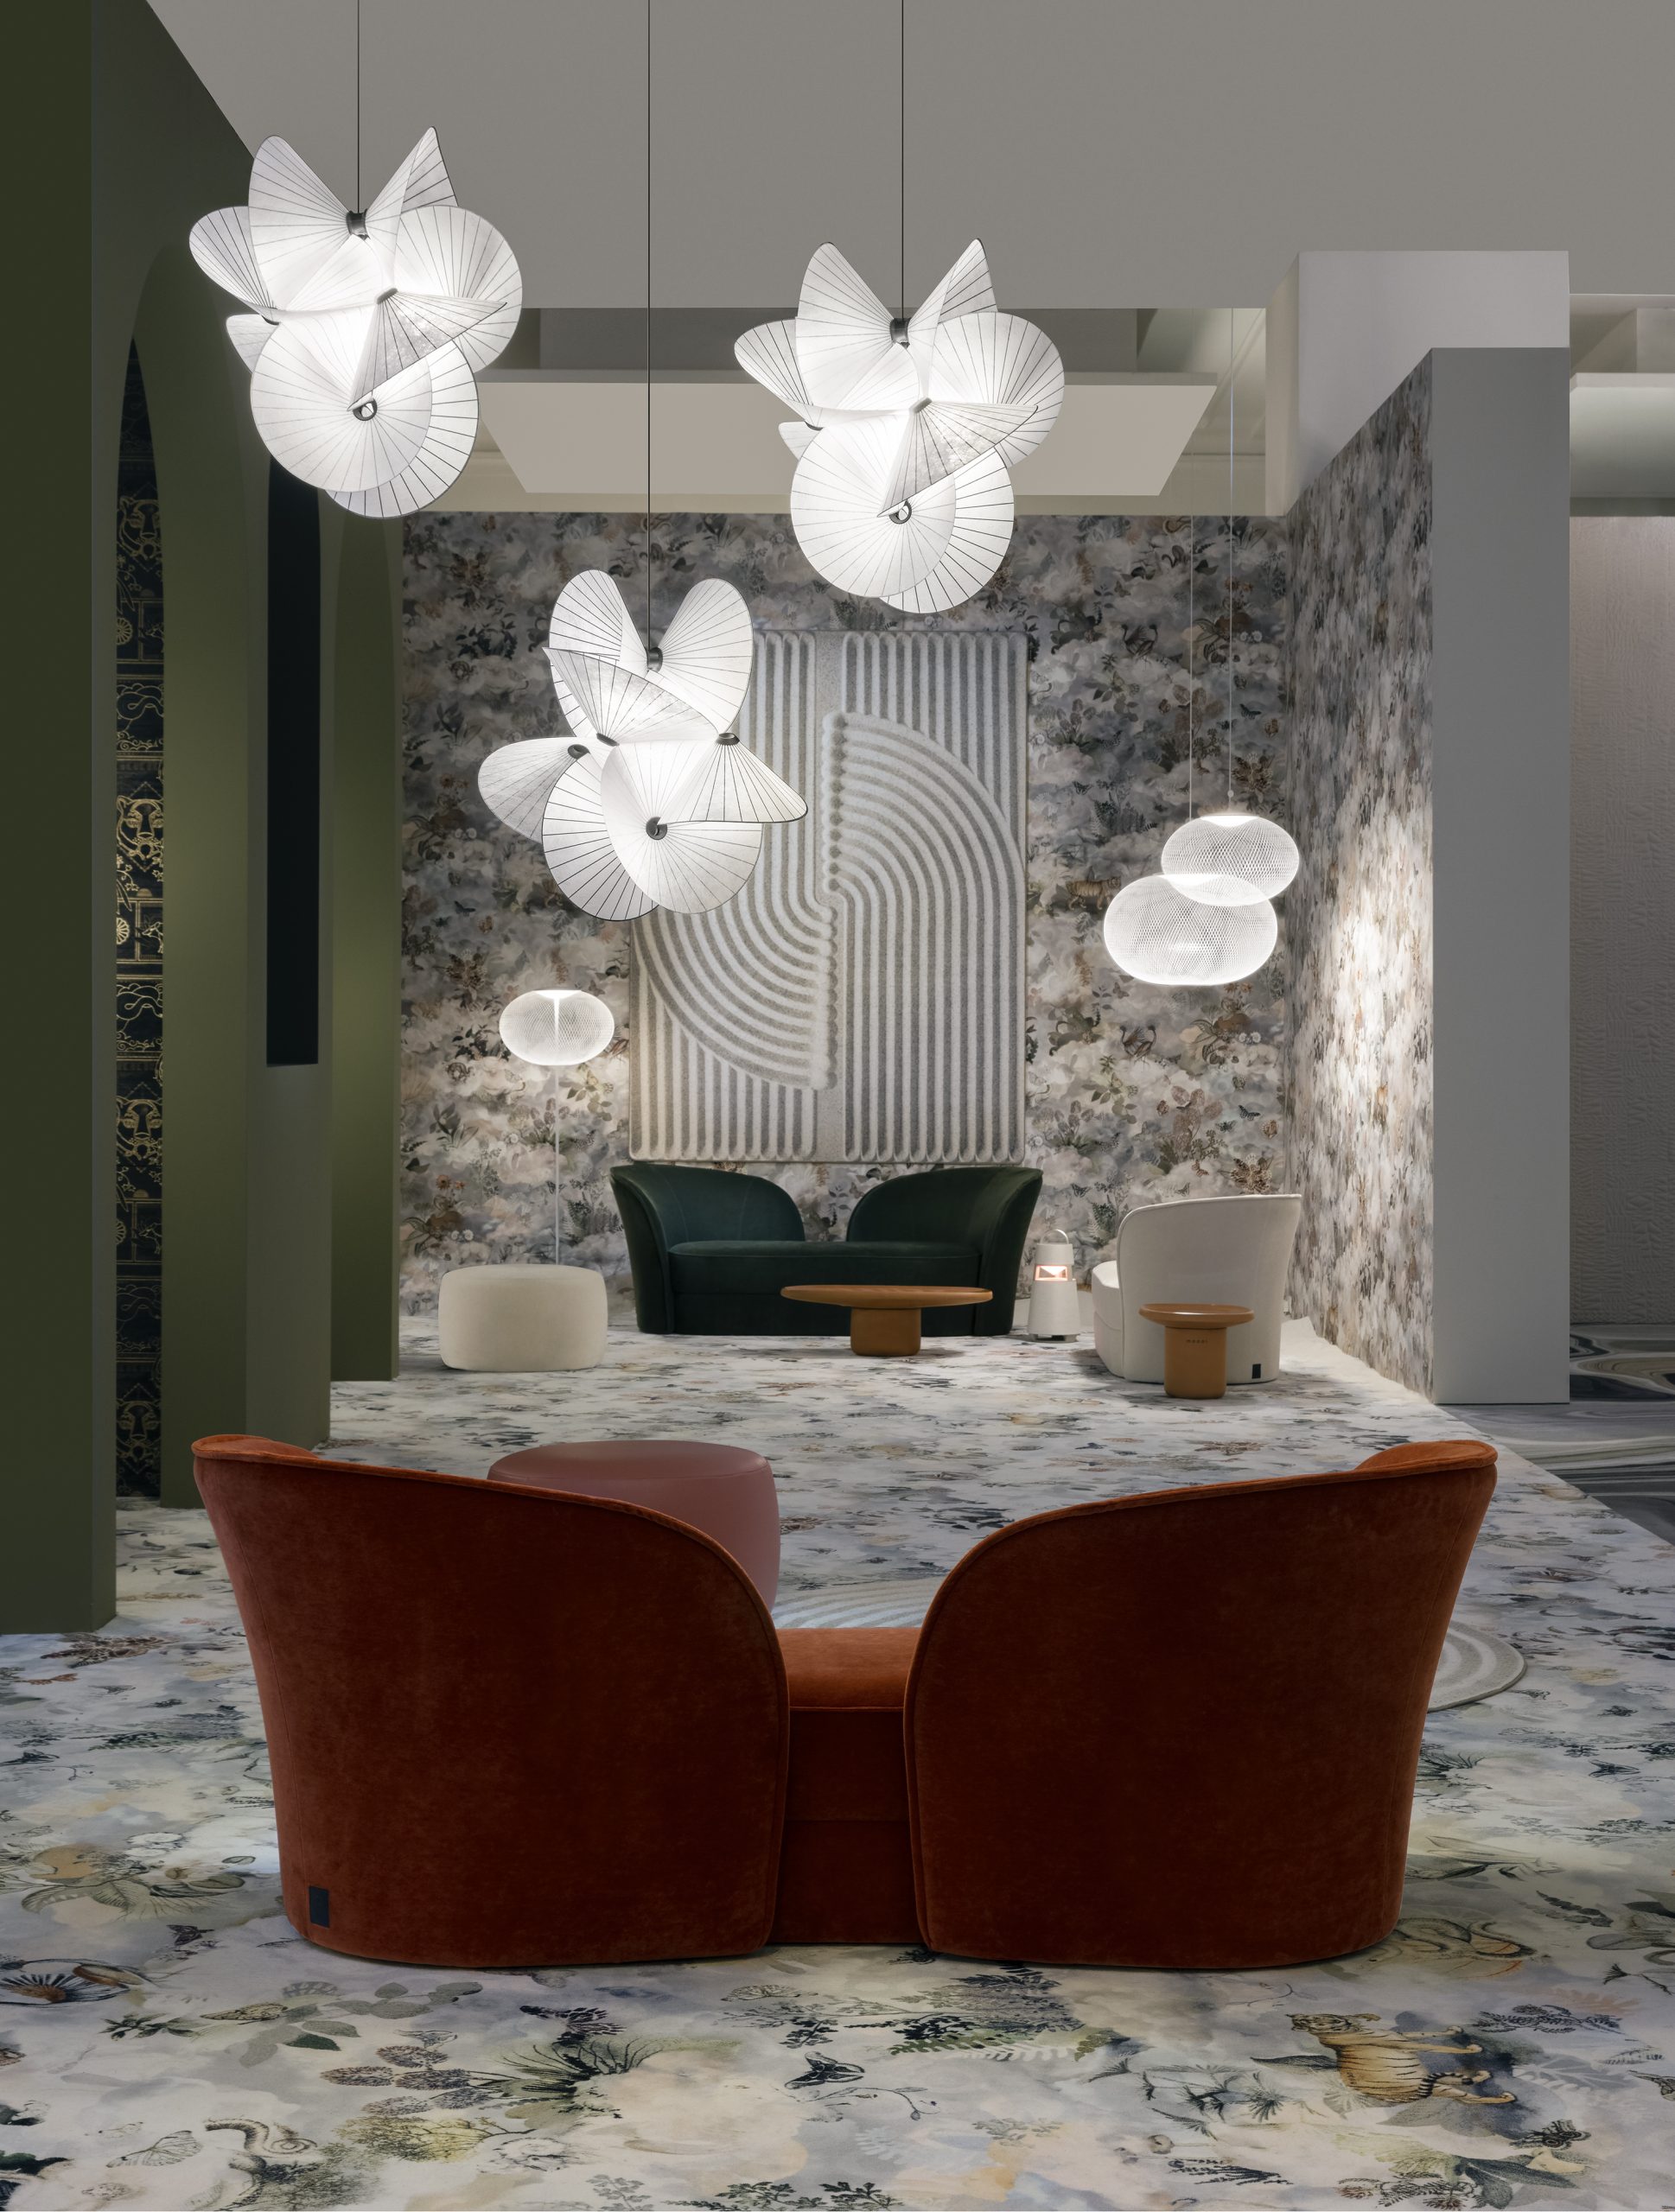 Have a look at this exclusive interview with Marcel Wanders